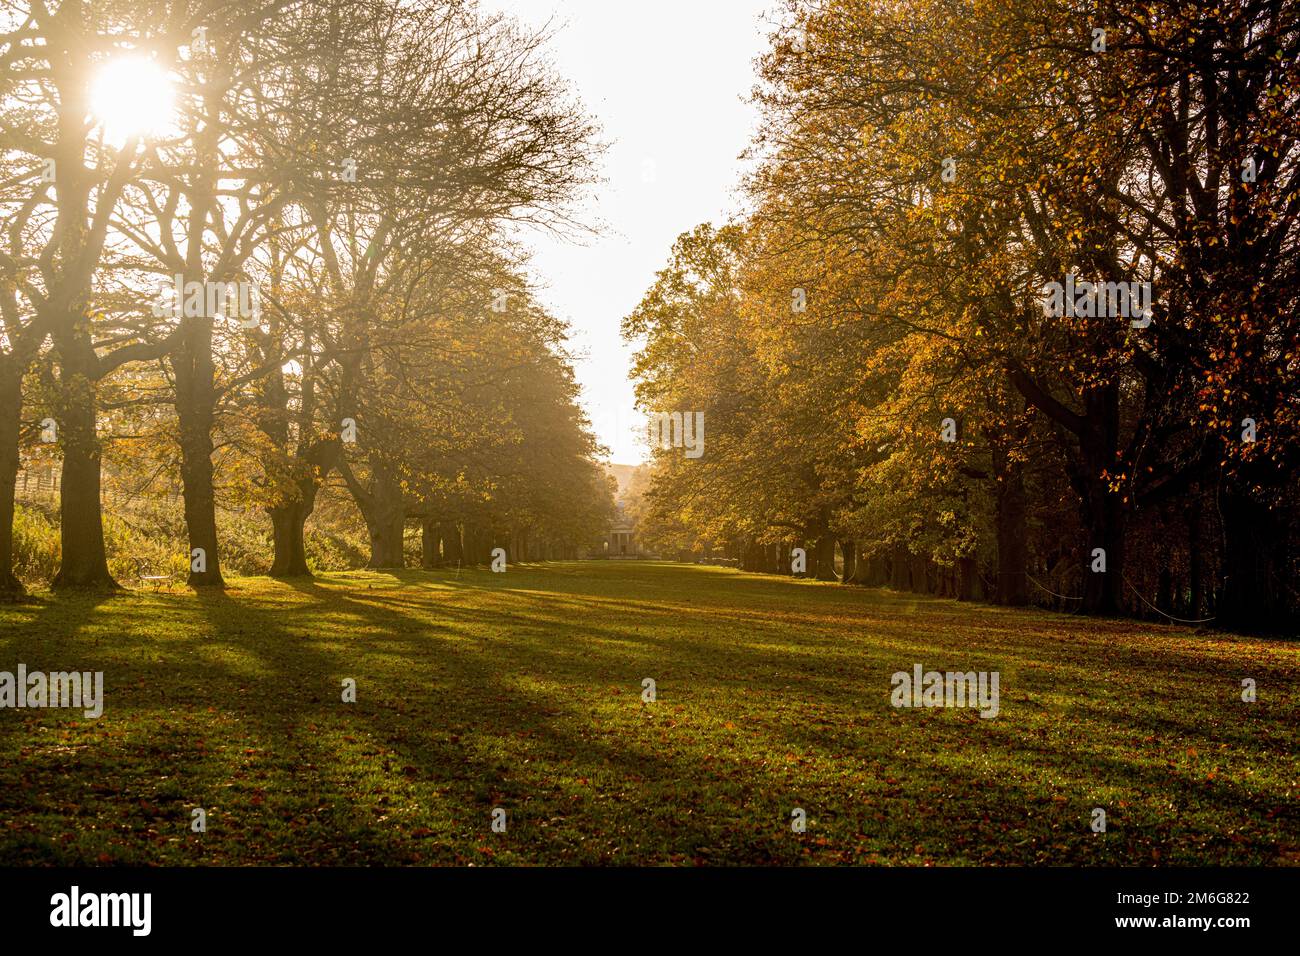 Tree line avenue looking toward the chapel at Gibside, illuminated with Autumn sunlight creating long shadows. Tyne and Wear. UK. Stock Photo